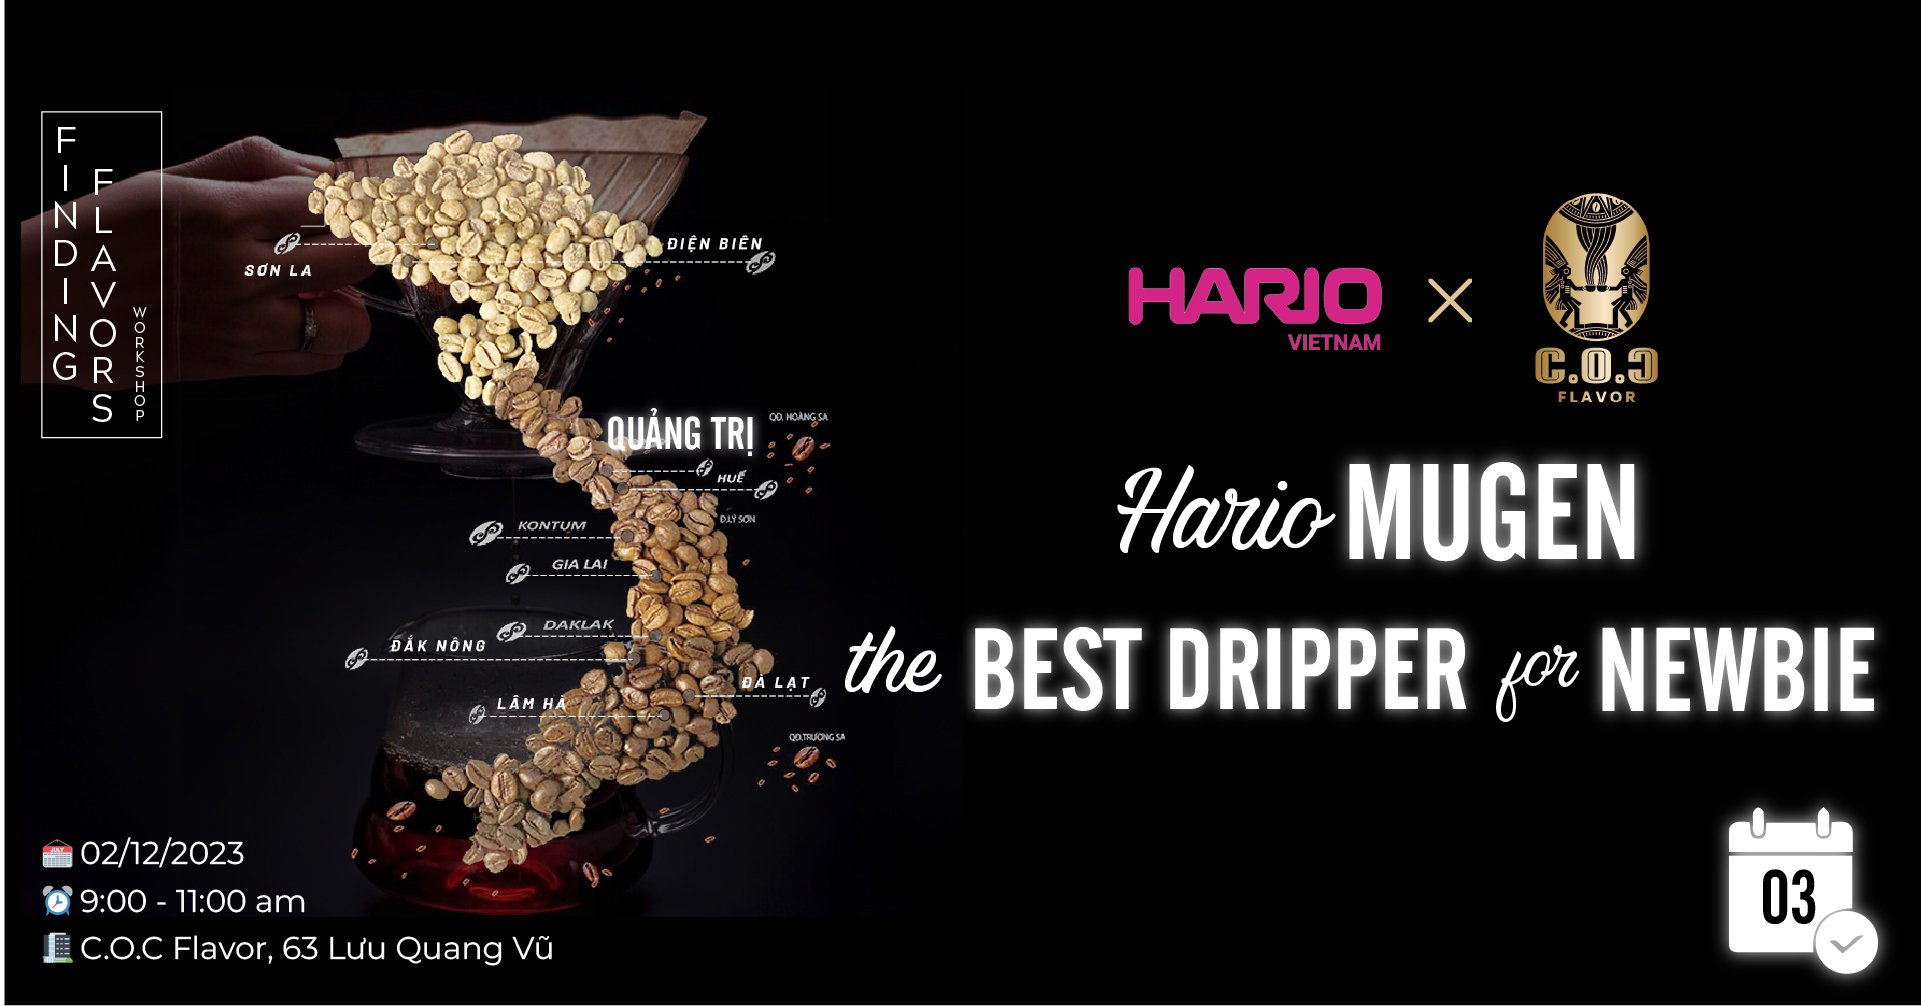 Finding Flavors: Hario Mugen - the Best DRIPPER for NEWBIE